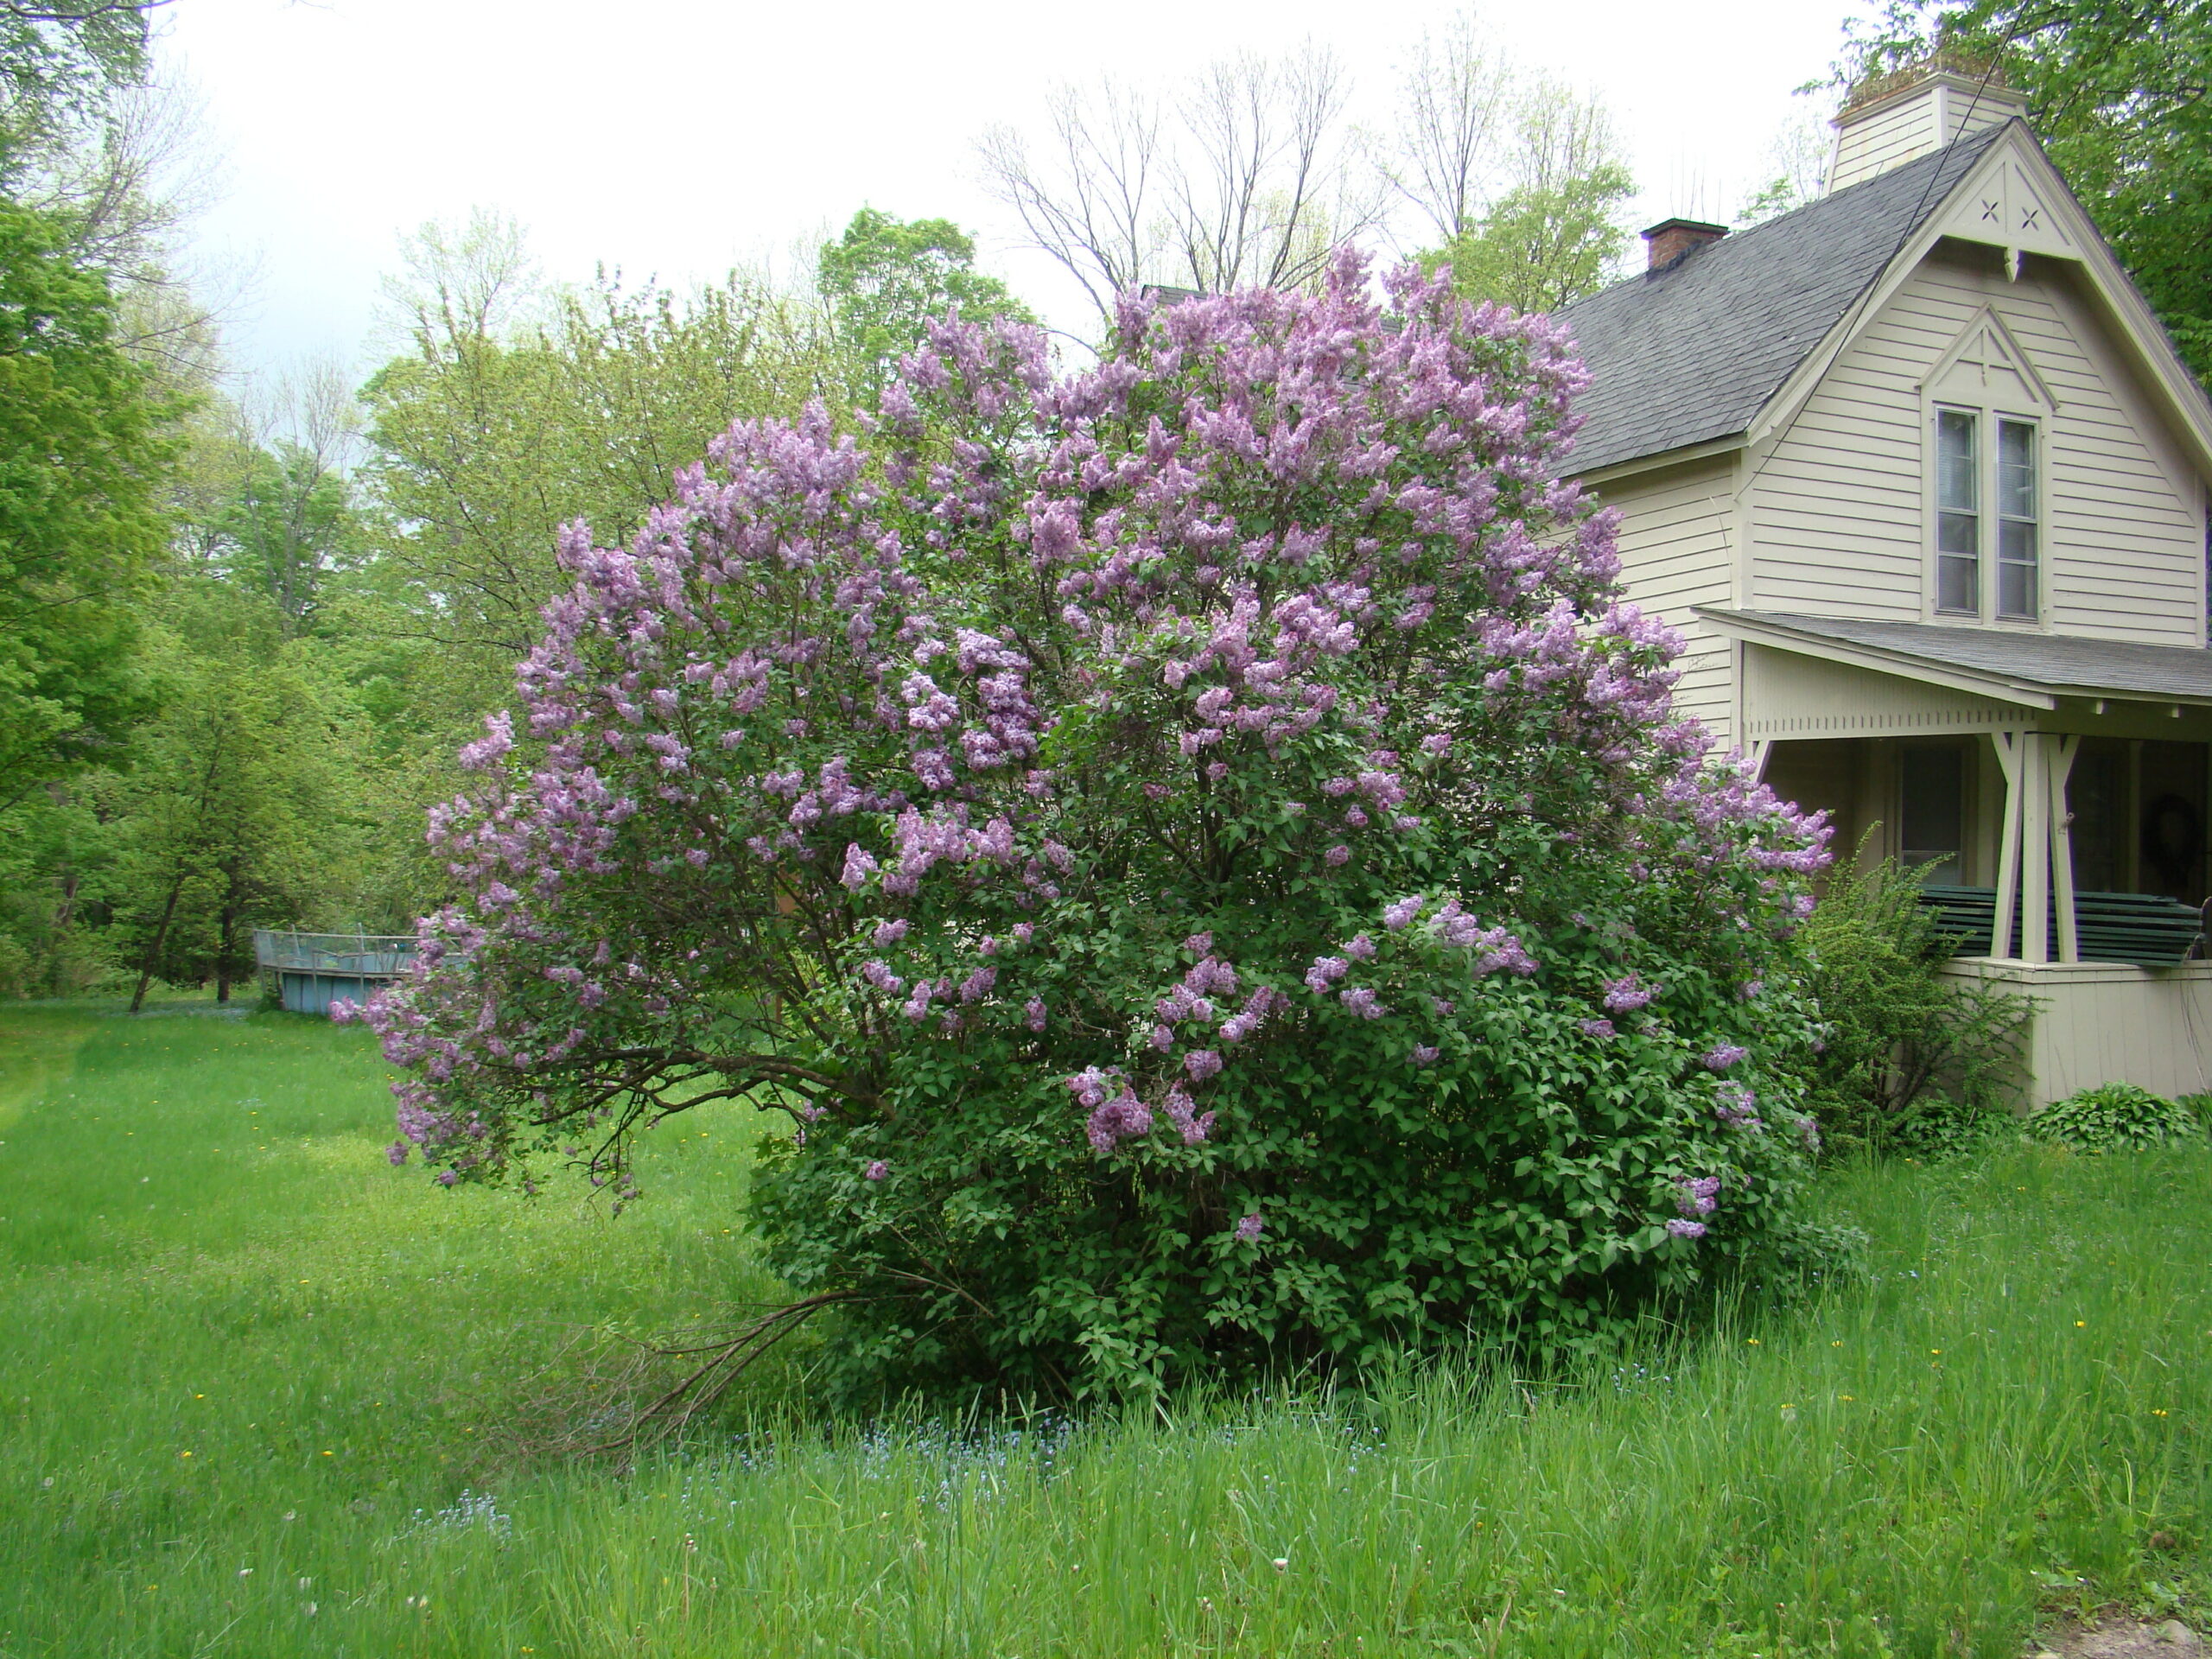 This lilac appears to have been pruned and thinned but not with thoughtfulness. Note the bushy bottom area versus the older and much taller stems and branches. Better planned pruning would have resulted in a more manageable shrub with the taller, older top branches being less likely to break in snow and ice.